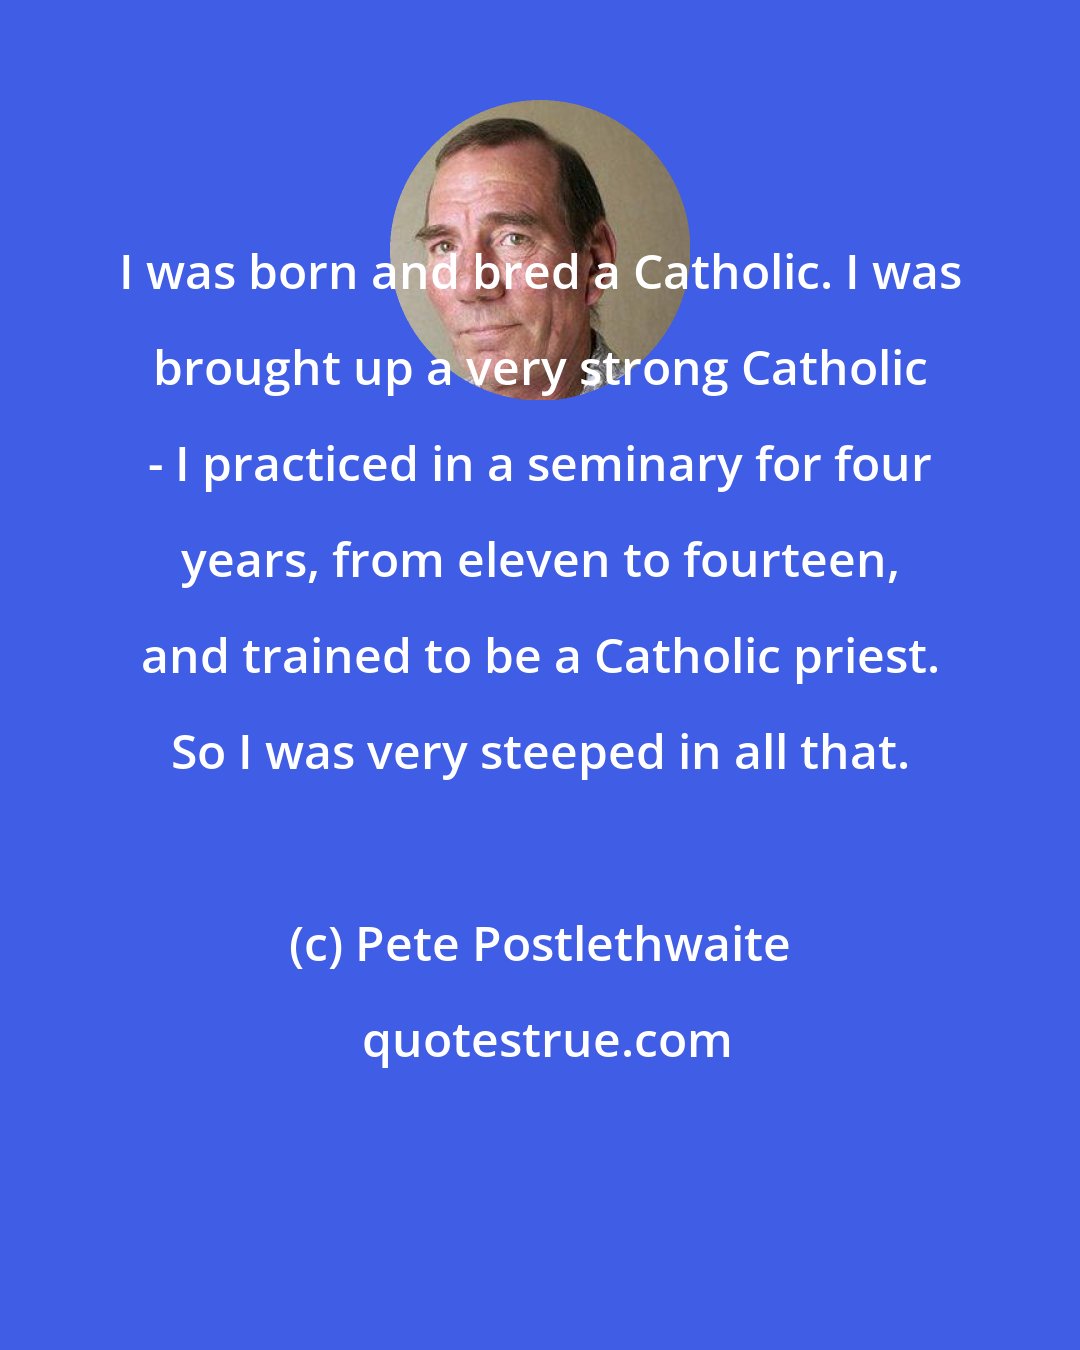 Pete Postlethwaite: I was born and bred a Catholic. I was brought up a very strong Catholic - I practiced in a seminary for four years, from eleven to fourteen, and trained to be a Catholic priest. So I was very steeped in all that.